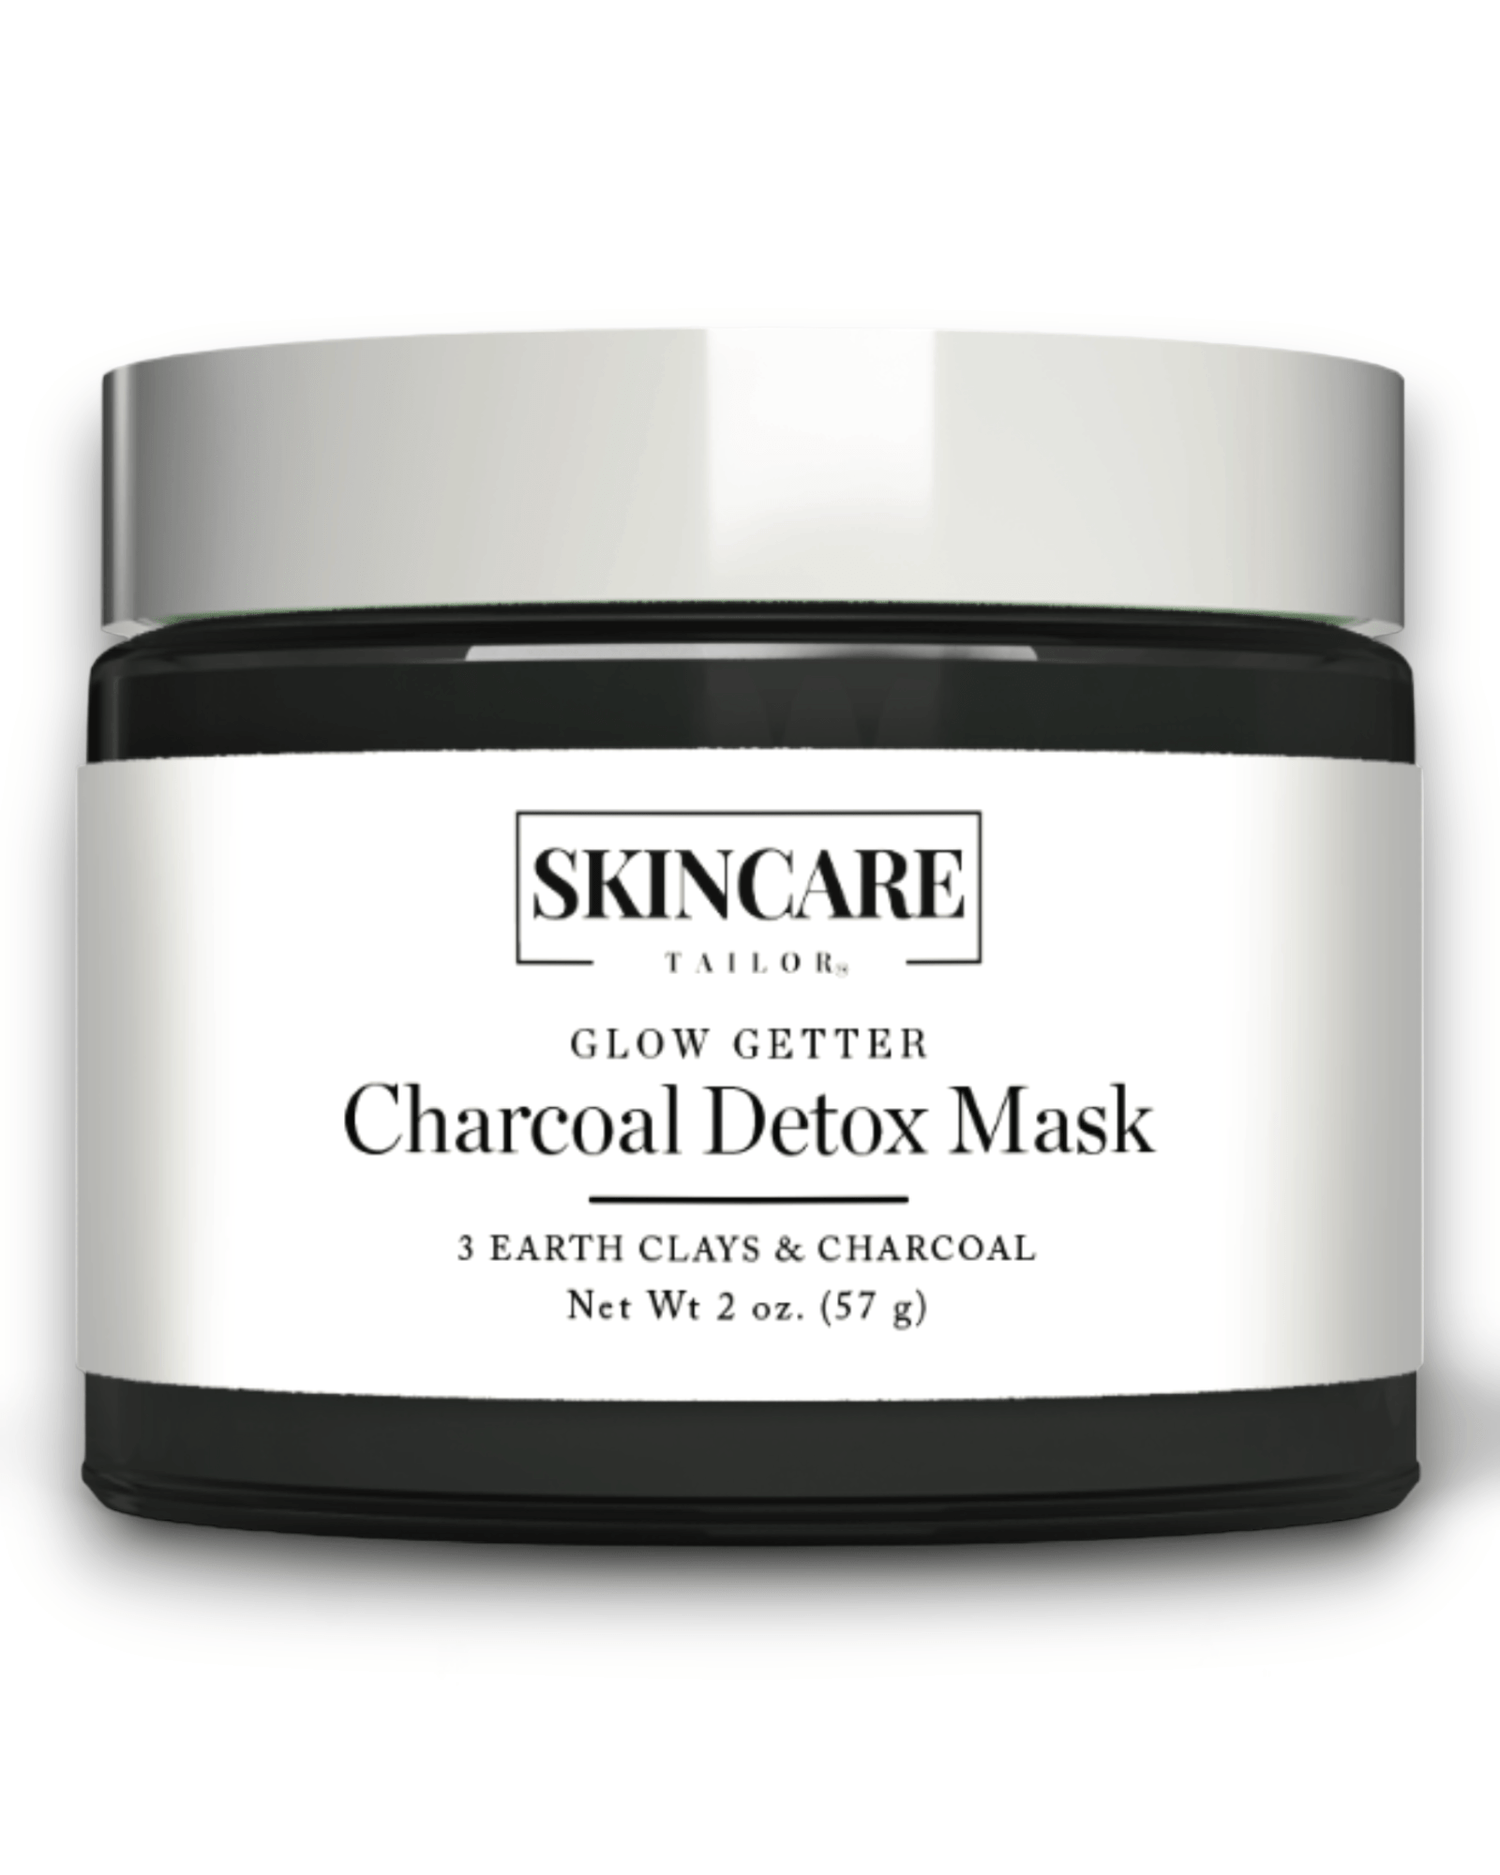 Glow Getter Charcoal Detox Mask | Volcanic Clay Mask | Skincare Tailor